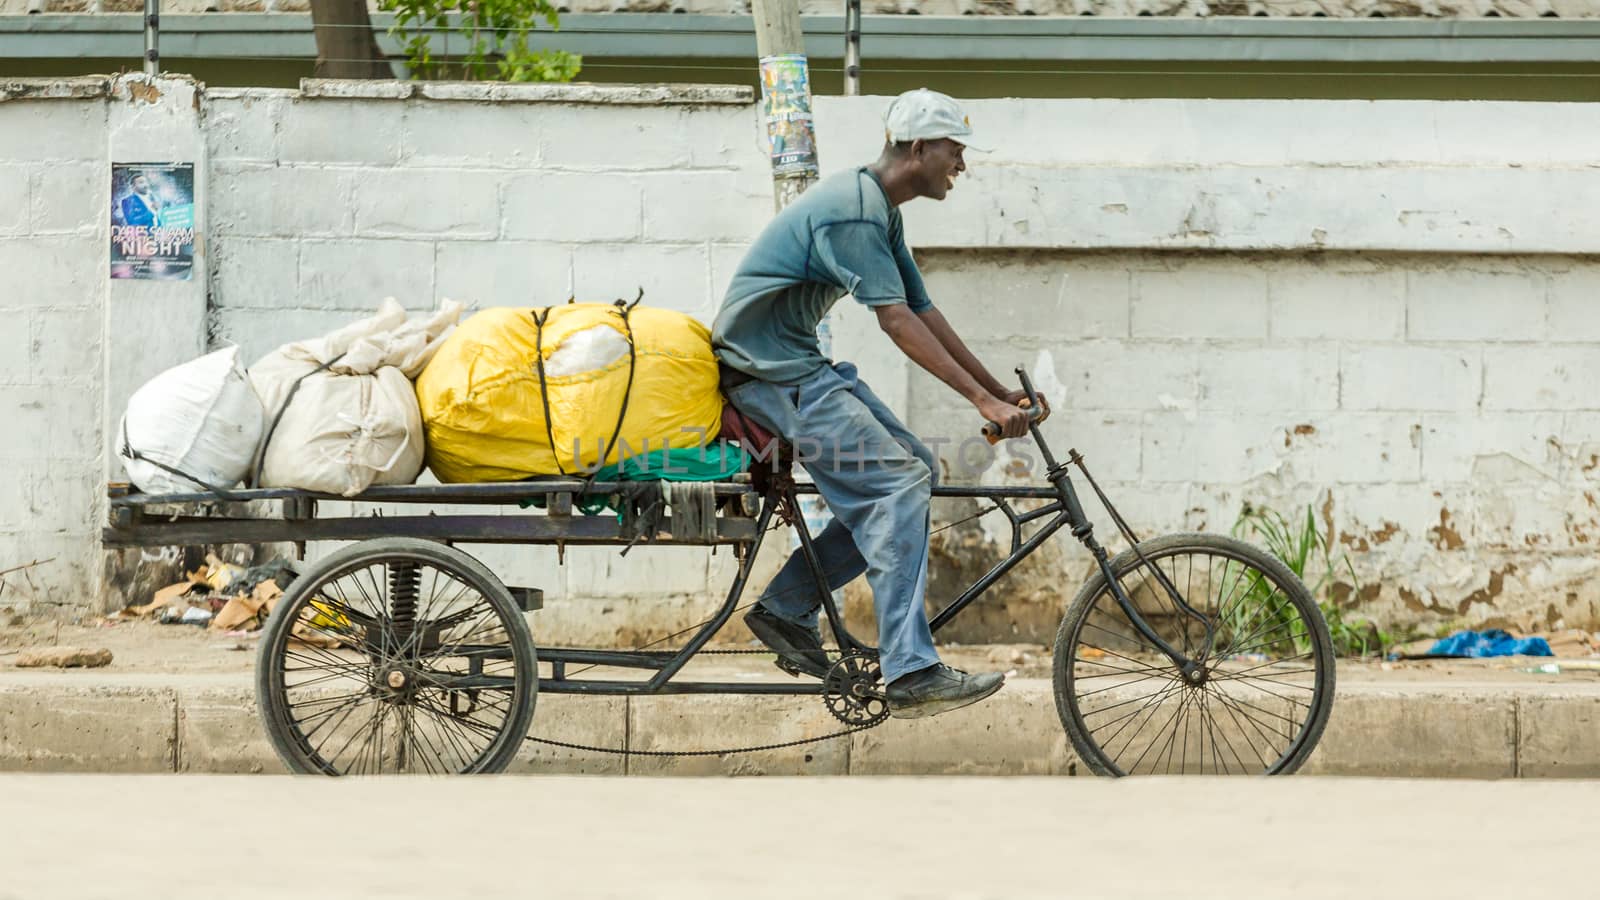 Dar Es Salaam: April 22: A man rides his customised bicycle fitted with a trailer that is loaded with large sacs, on April 22, 2015 in Dar Es Salaam, Tanzania